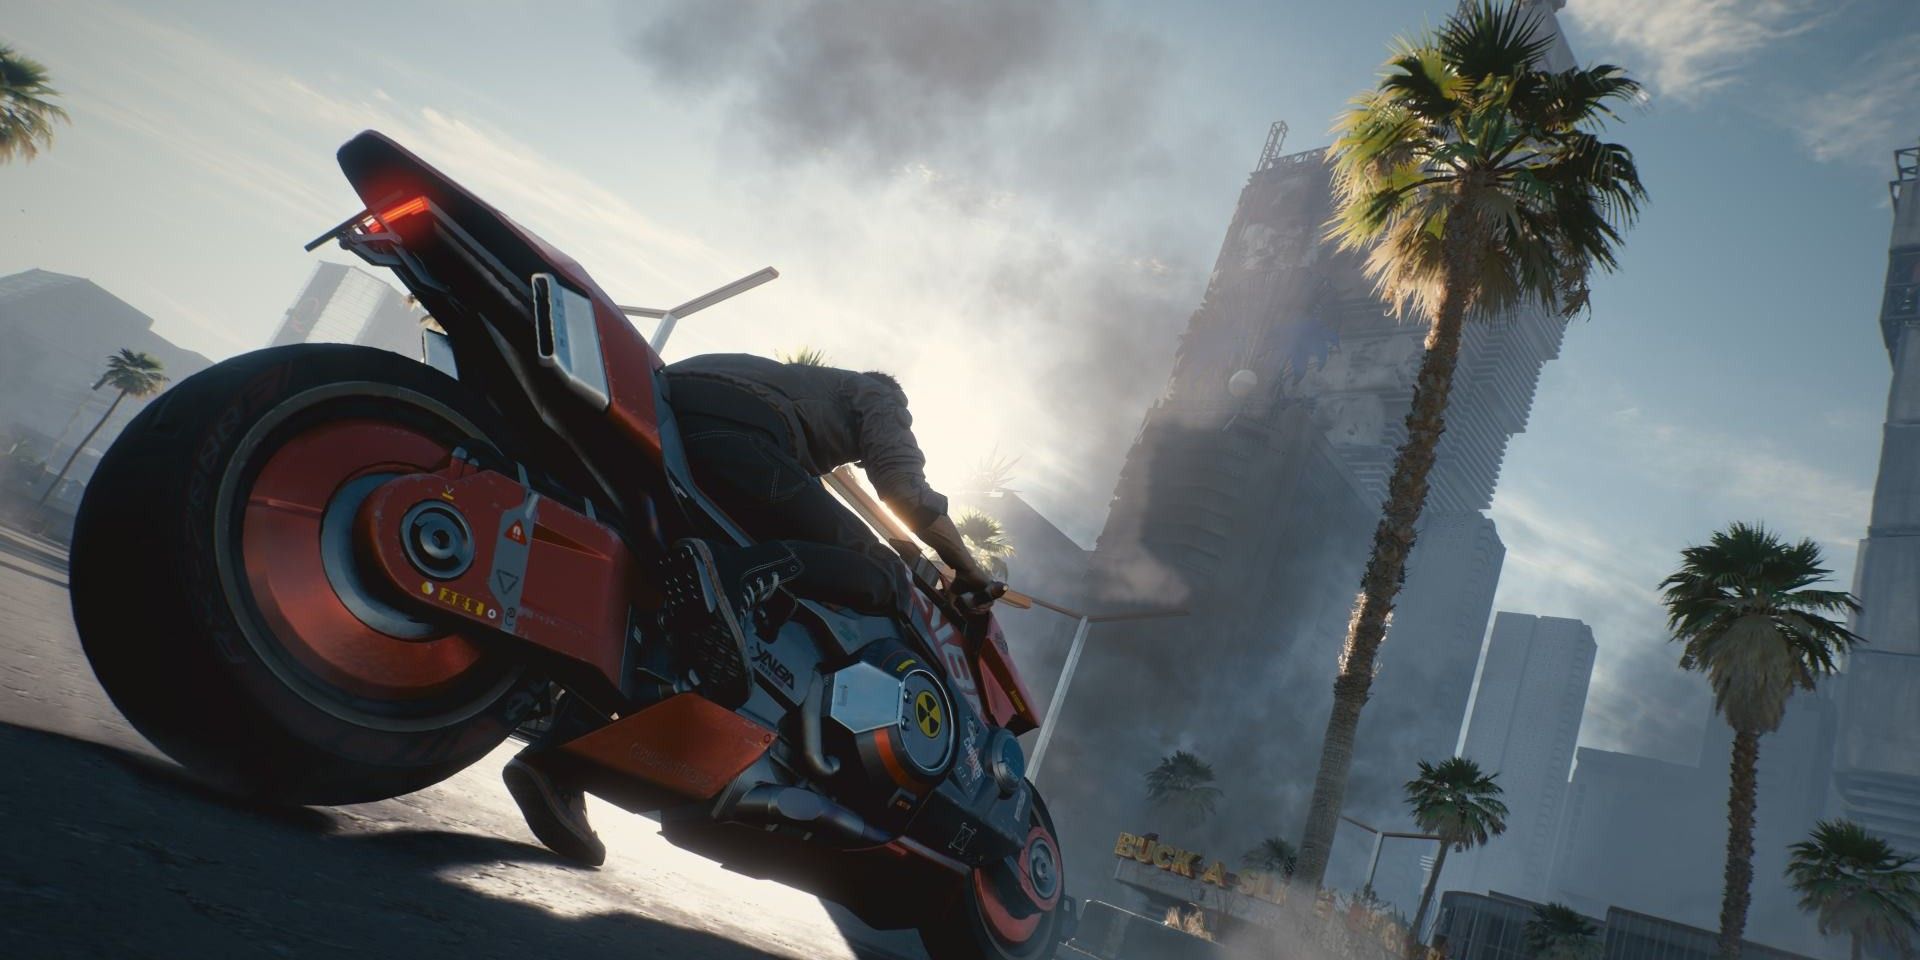 V riding a motorcycle in Cyberpunk 2077.